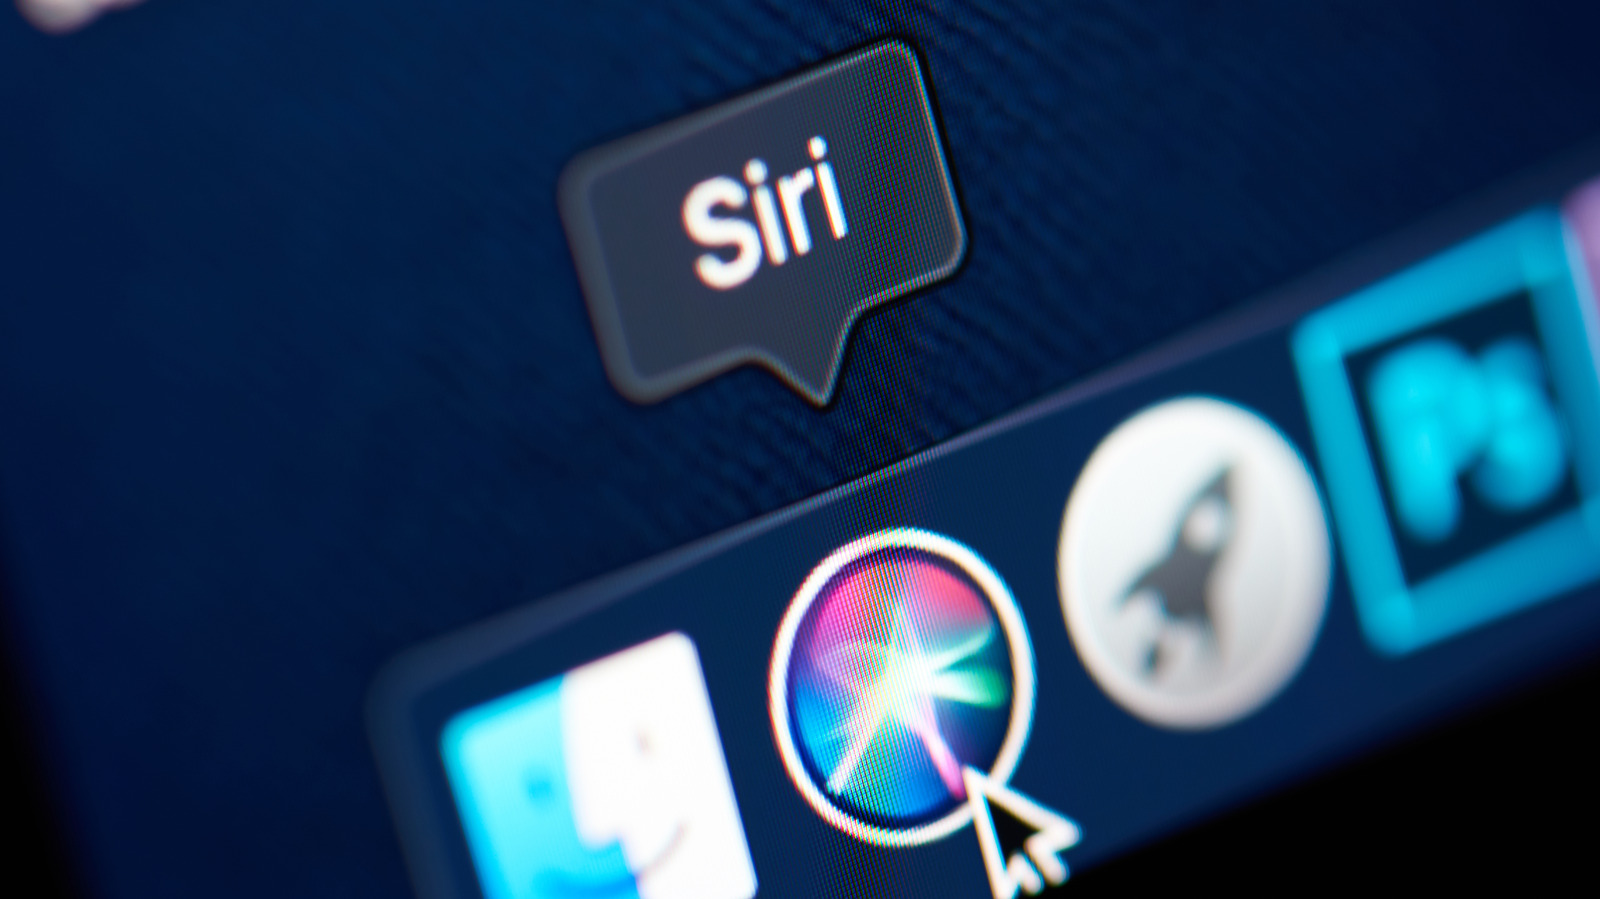 How To Disable Siri On iPhone, And Why You Might Want To – SlashGear